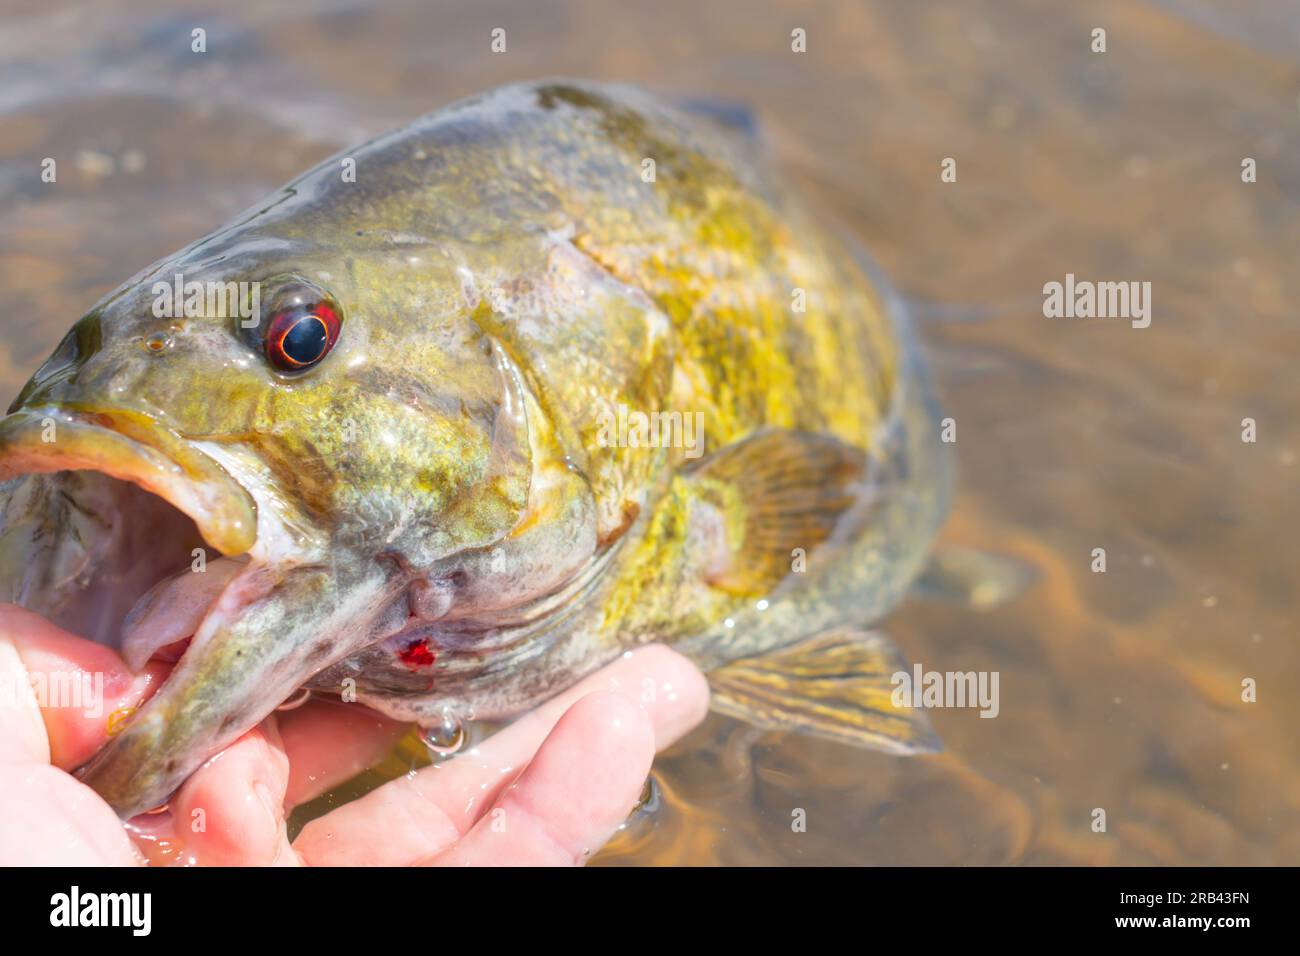 https://c8.alamy.com/comp/2RB43FN/copy-space-backgrounds-smallmouth-bass-summer-catch-in-water-catch-and-release-outdoors-activity-theme-banner-space-2RB43FN.jpg